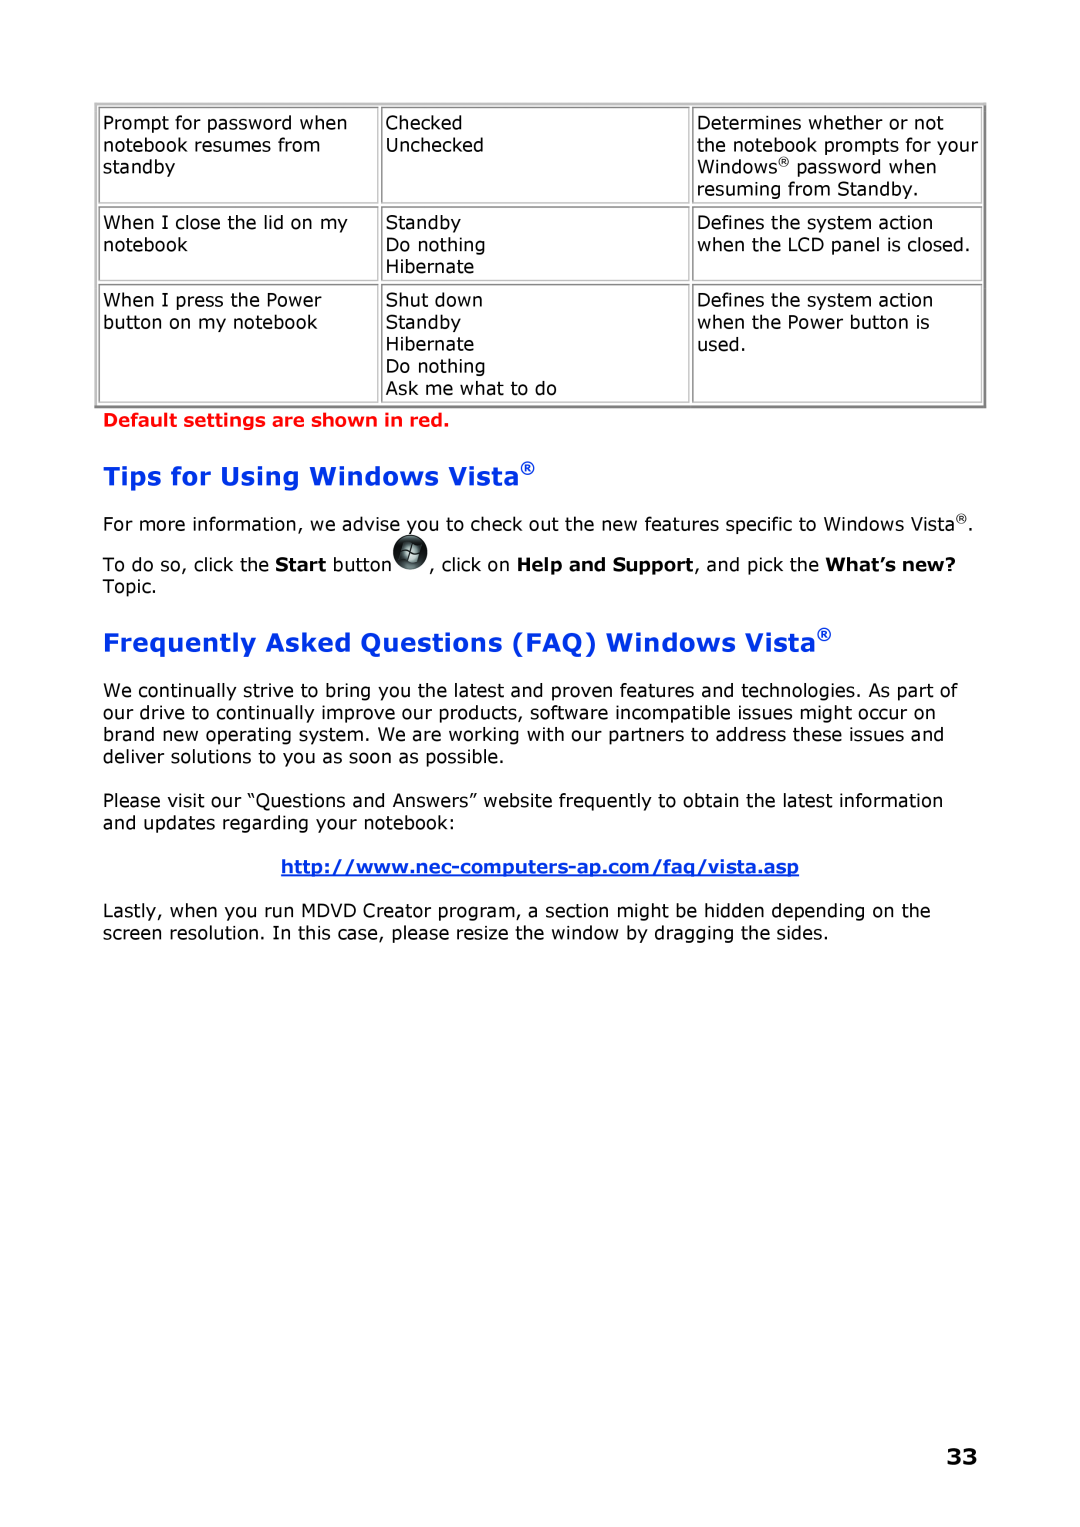 NEC P8510 Tips for Using Windows Vista, Frequently Asked Questions FAQ Windows Vista, Default settings are shown in red 